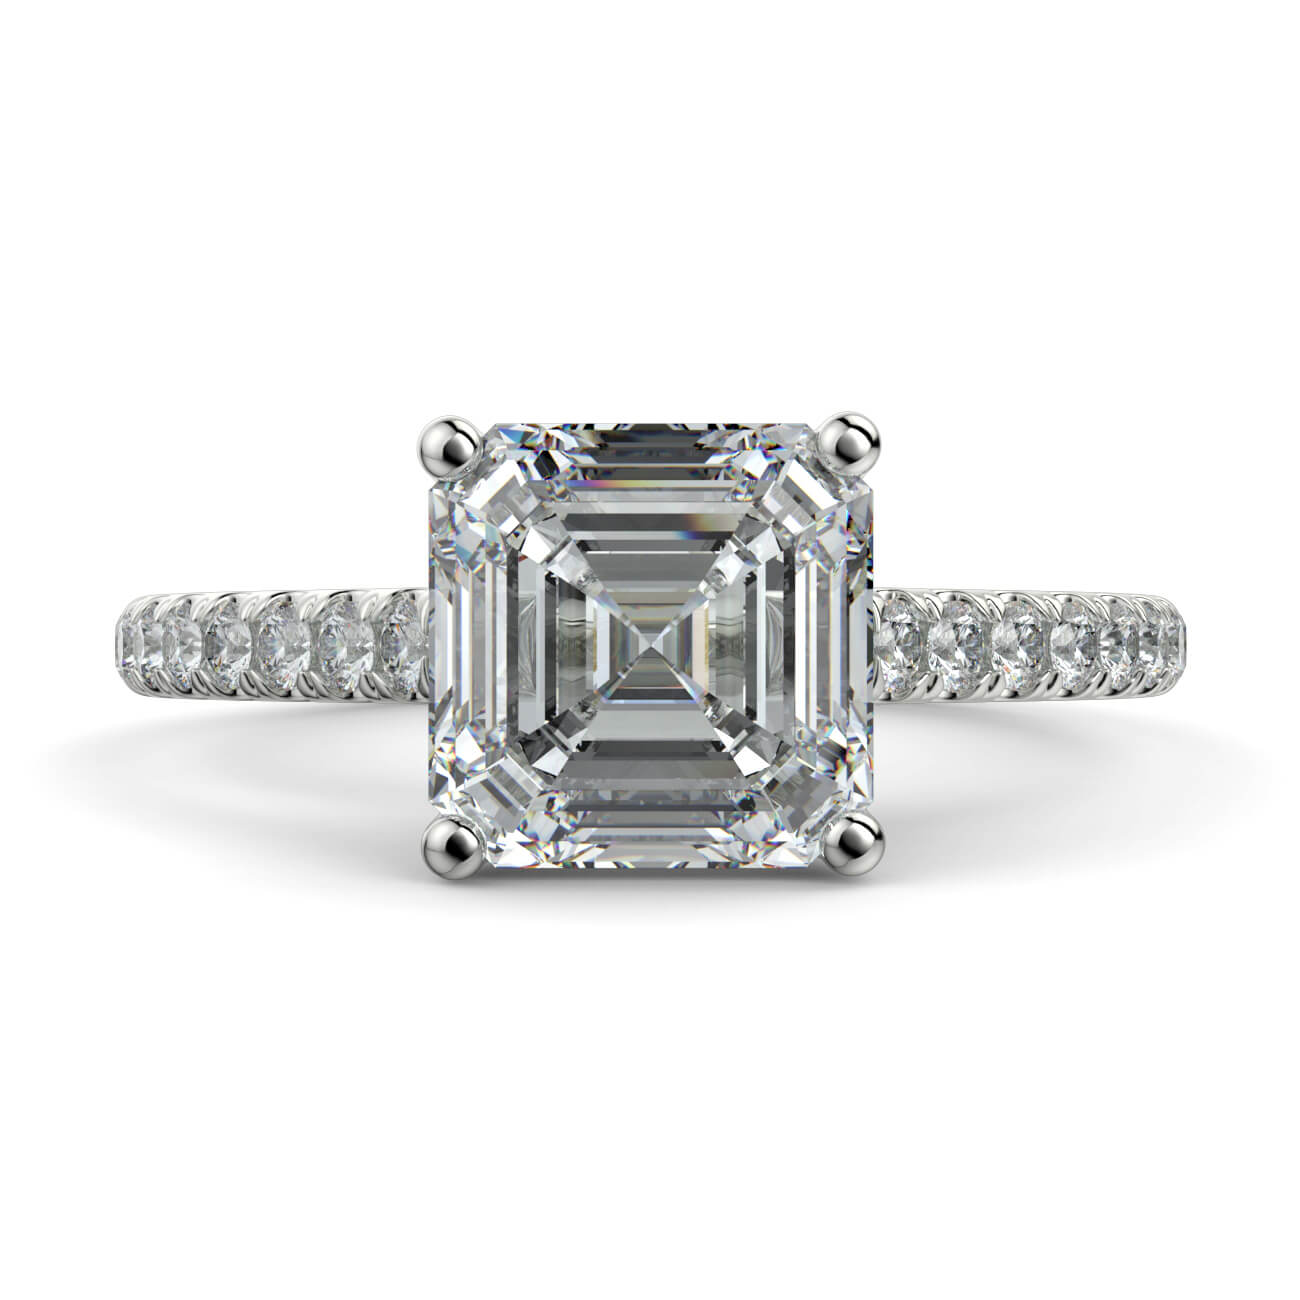 Asscher Cut diamond cathedral engagement ring in white gold – Australian Diamond Network